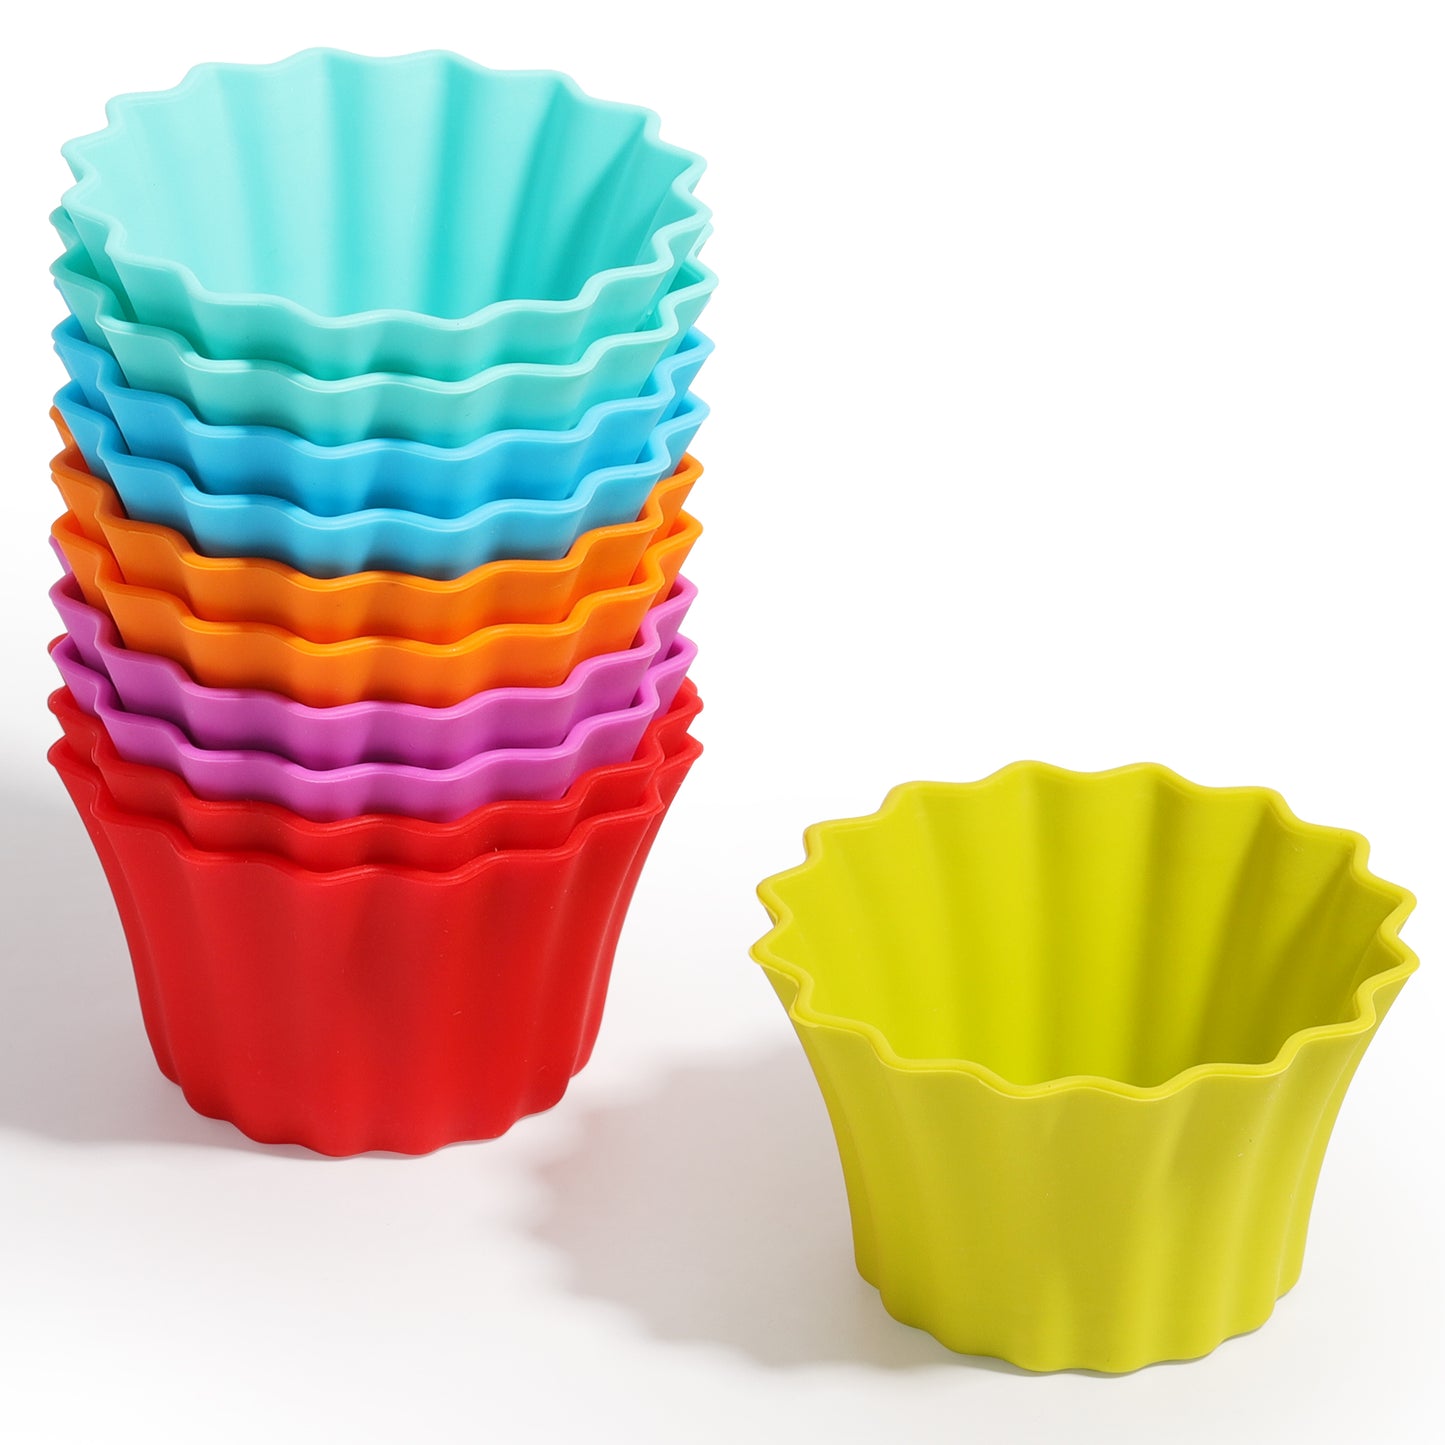 Kayaso Reusable Silicone Baking Cups, Cake molds None-Stick